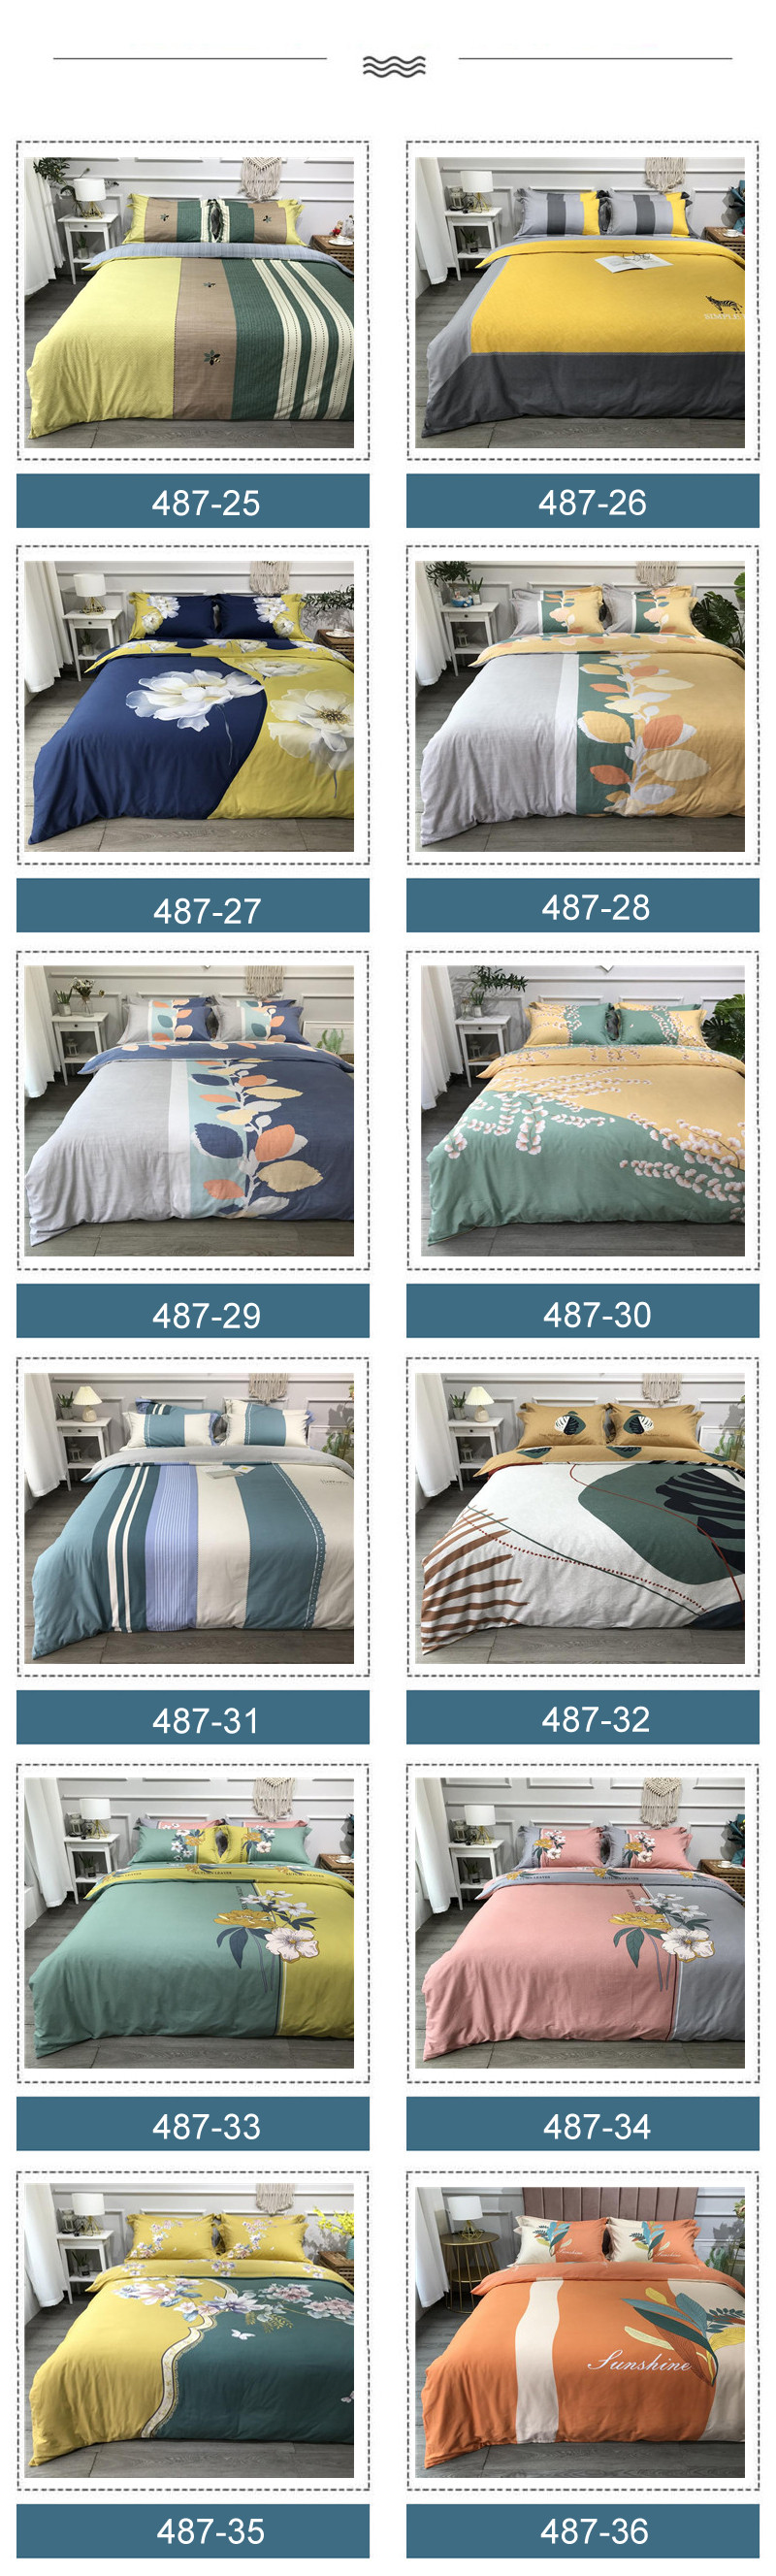 Good Price Beds And Linens Home